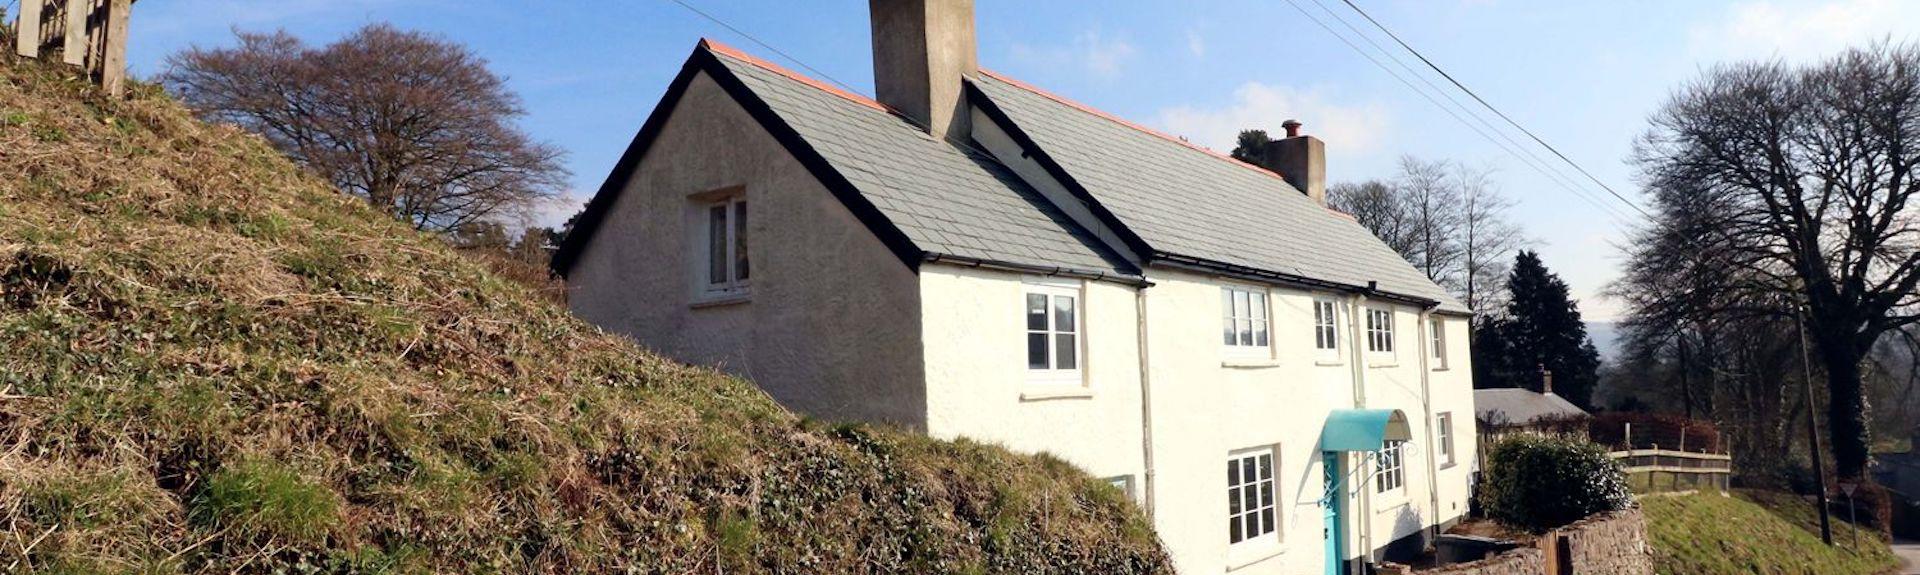 An Exmoor Longhouse overlooks a quiet, steep-banked country lane